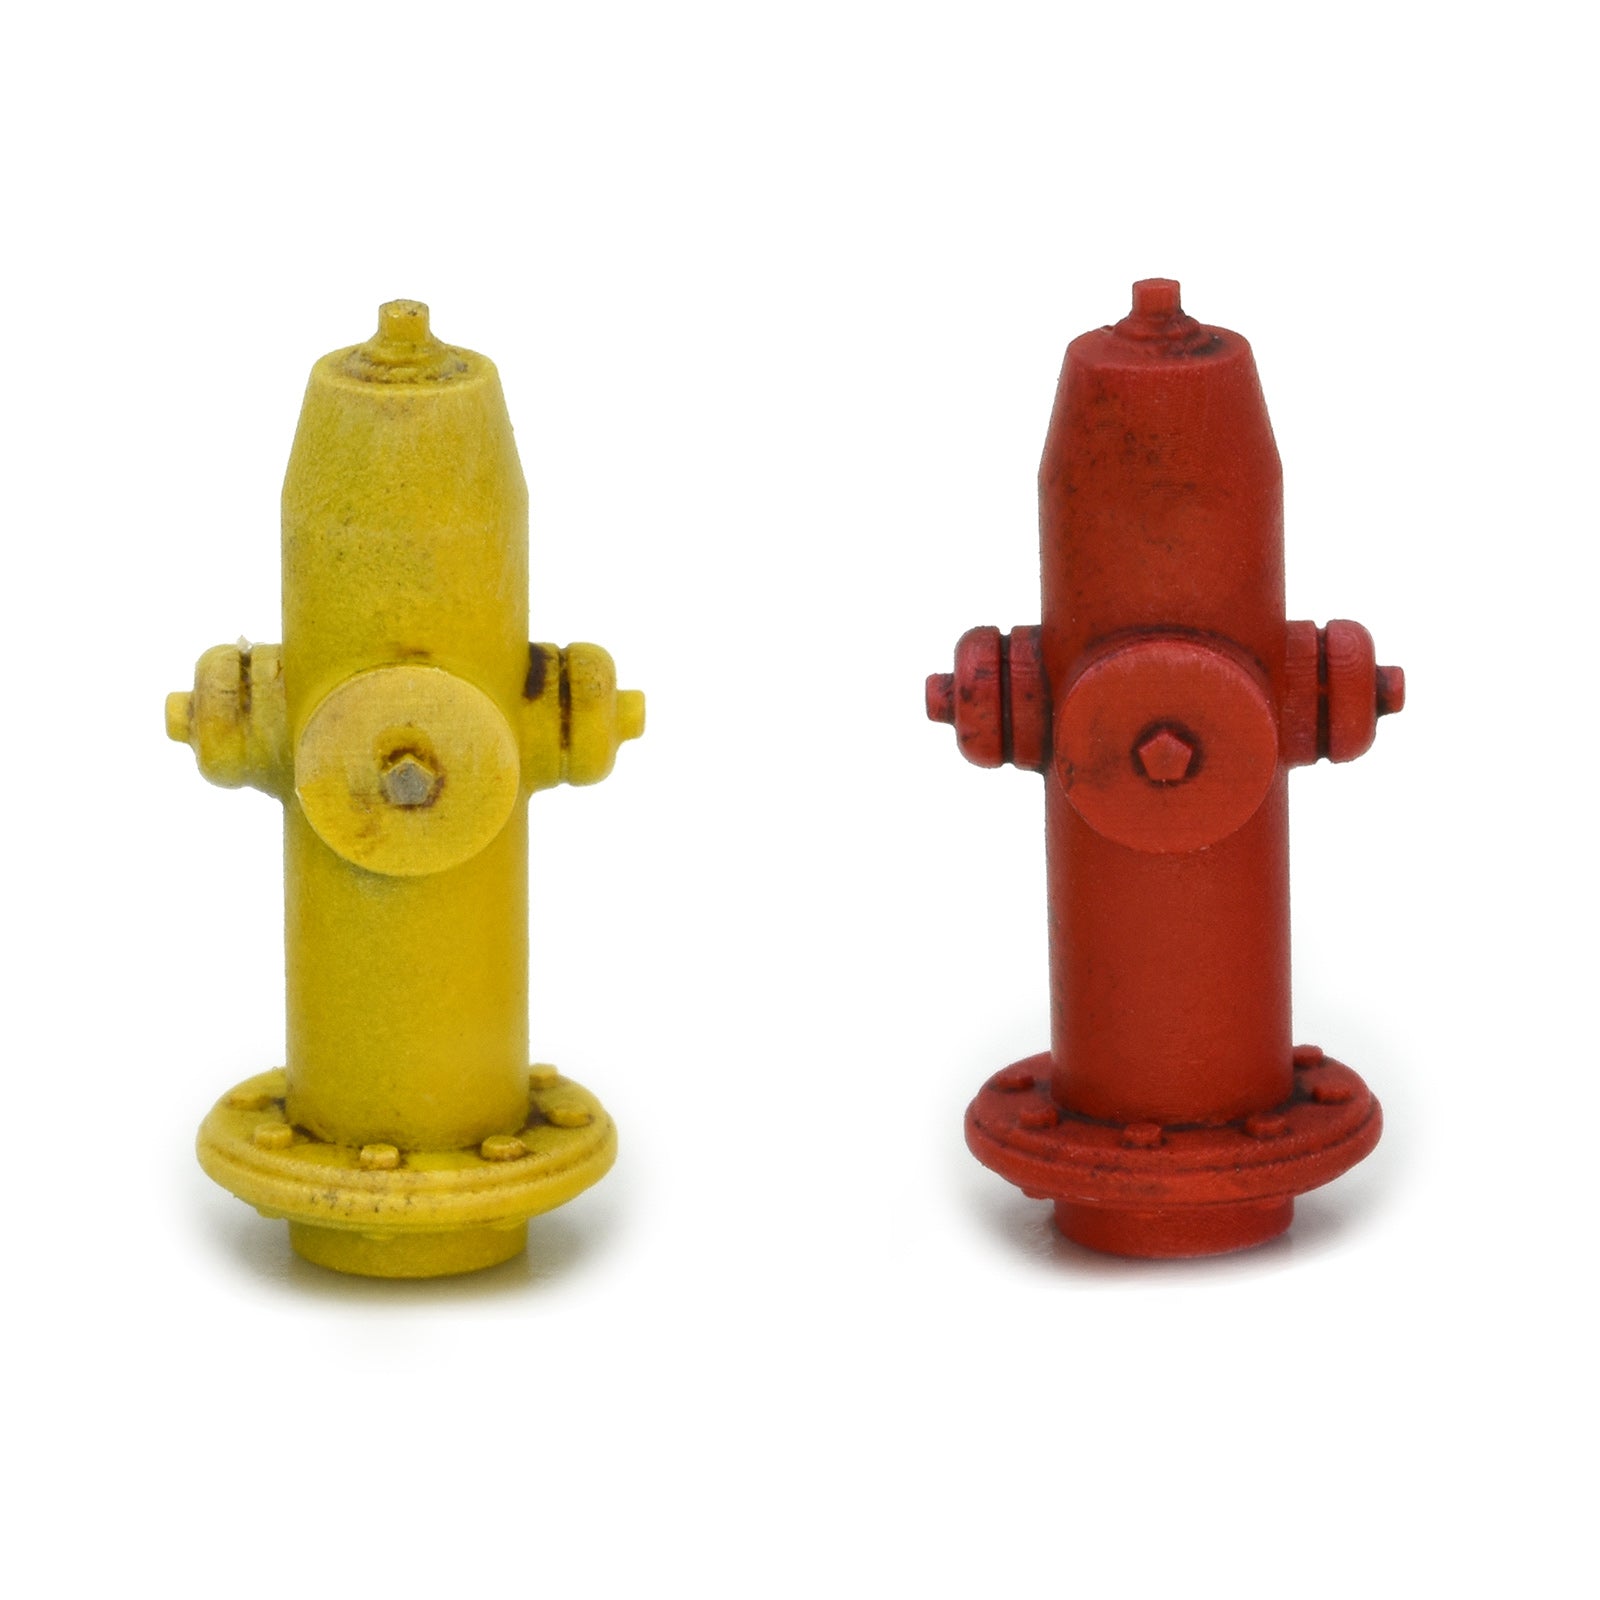 Modern Fire Hydrant, O Scale, by Scientific, Pack of 10